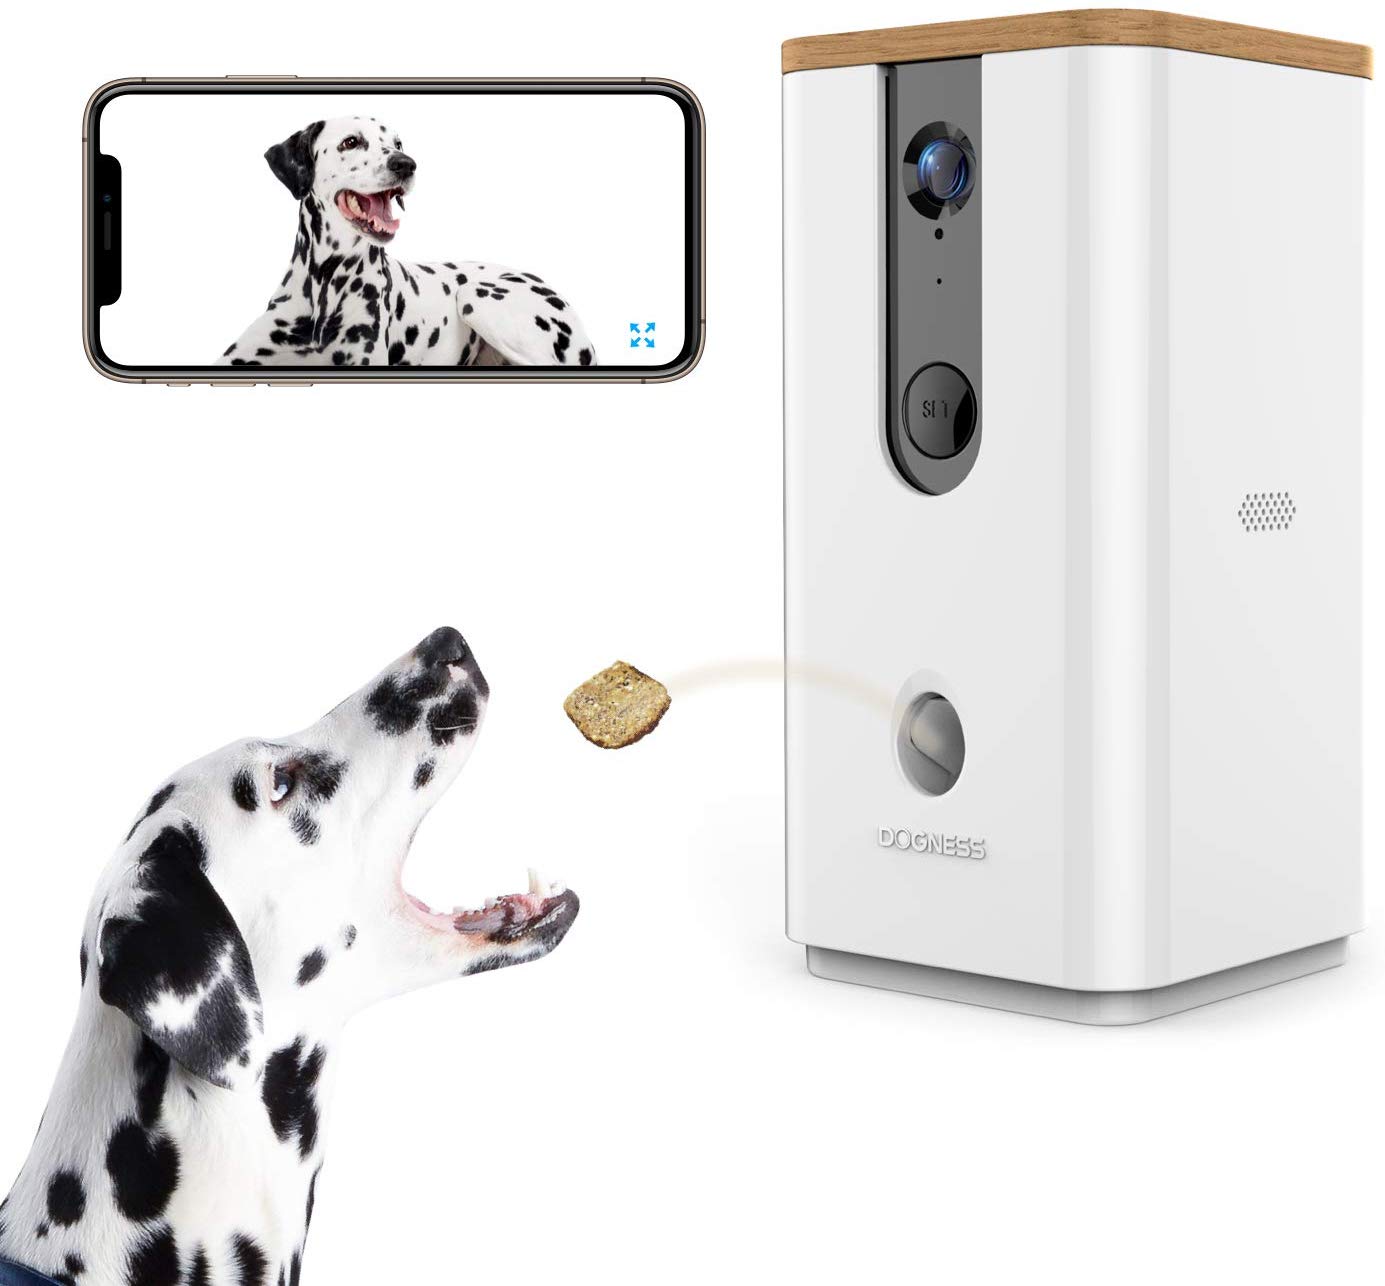 Remote Treat Dispensers, How Do You Choose? 